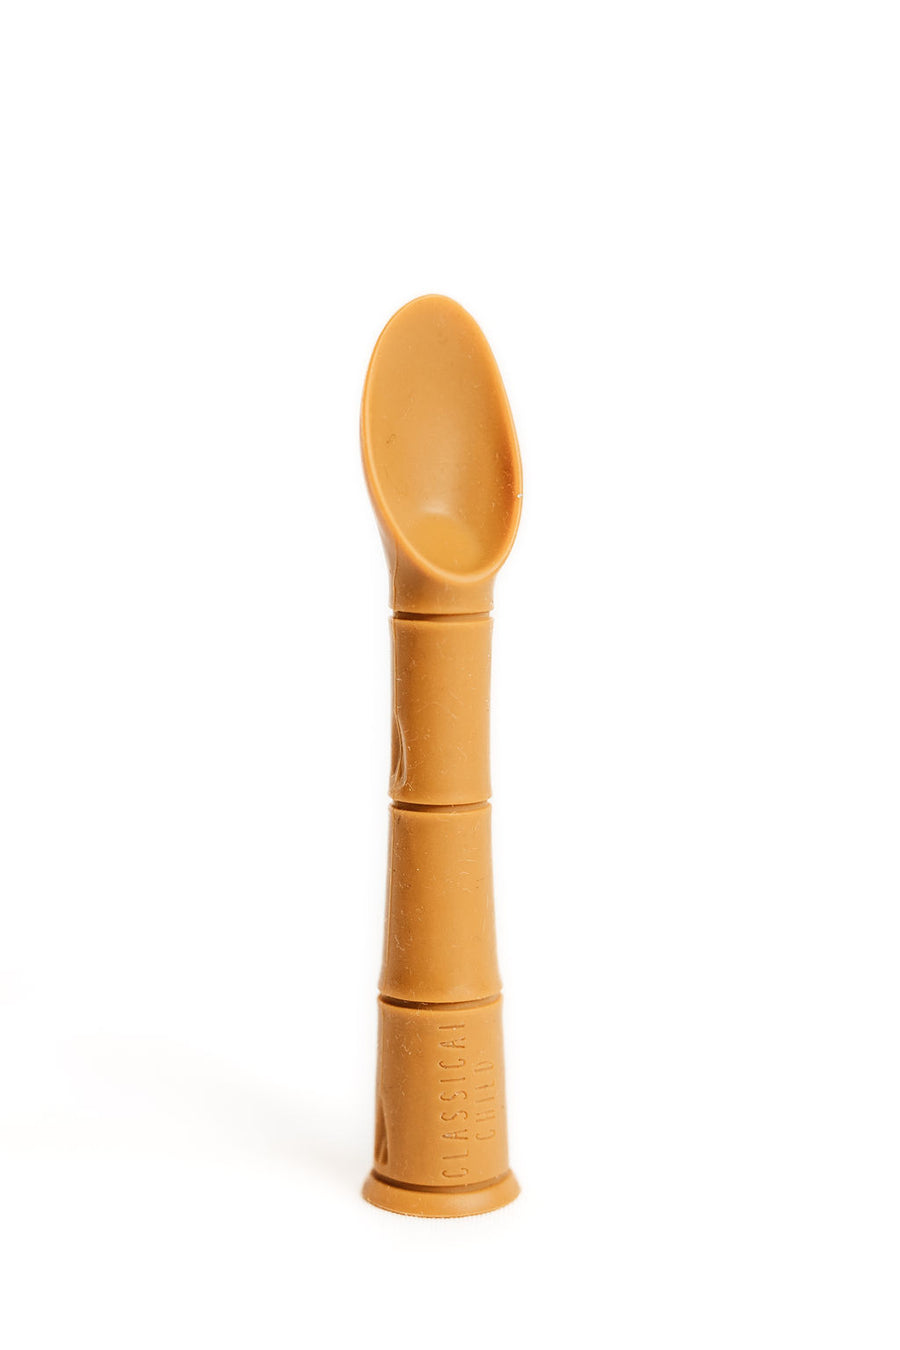 Ochre Silicone Beginner Baby Spoon 2 Pack